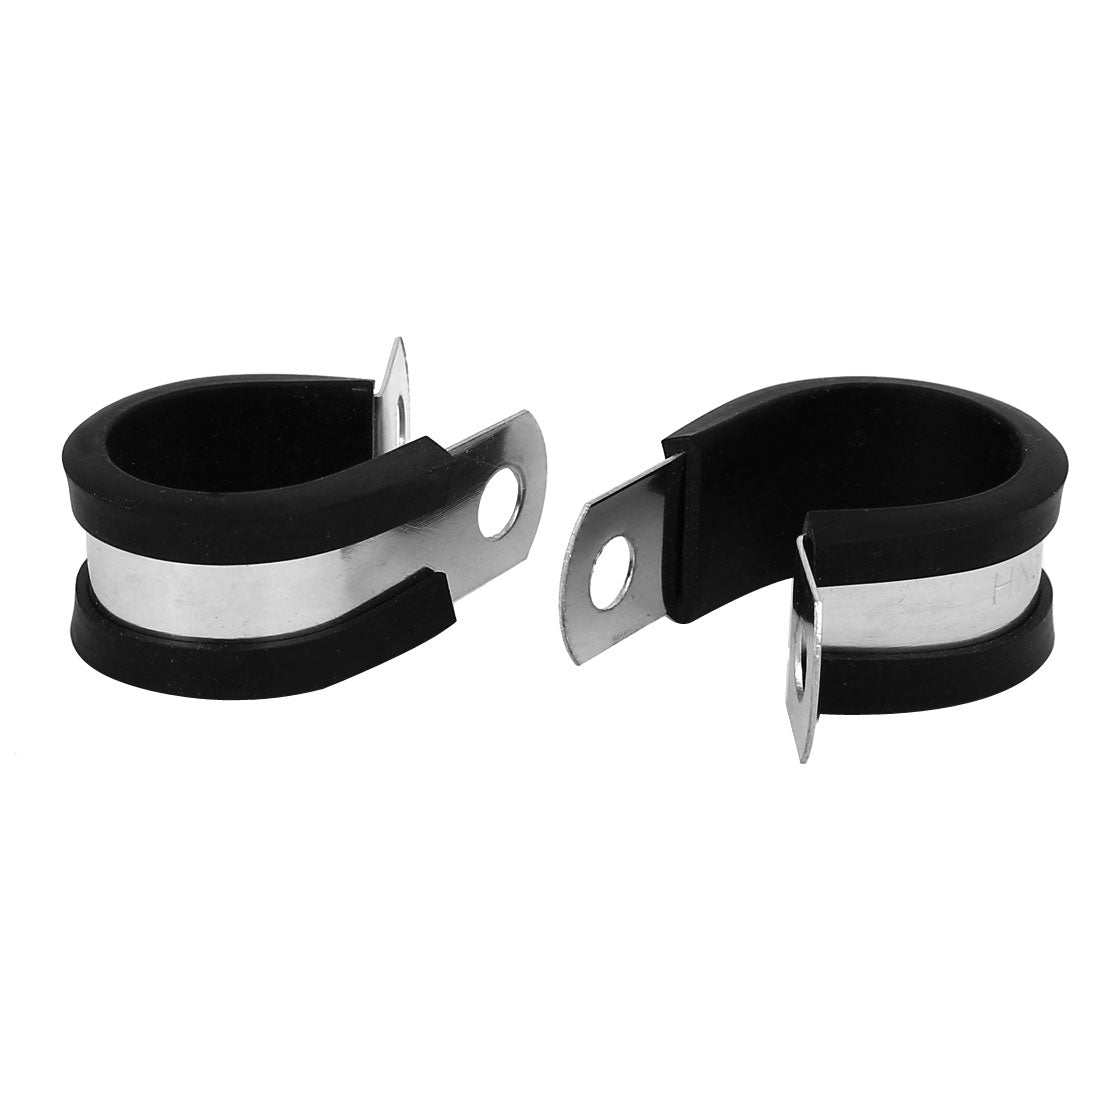 uxcell Uxcell 20mm Dia EPDM Rubber Lined P Clips Cable Hose Pipe Clamps Holder 2pcs